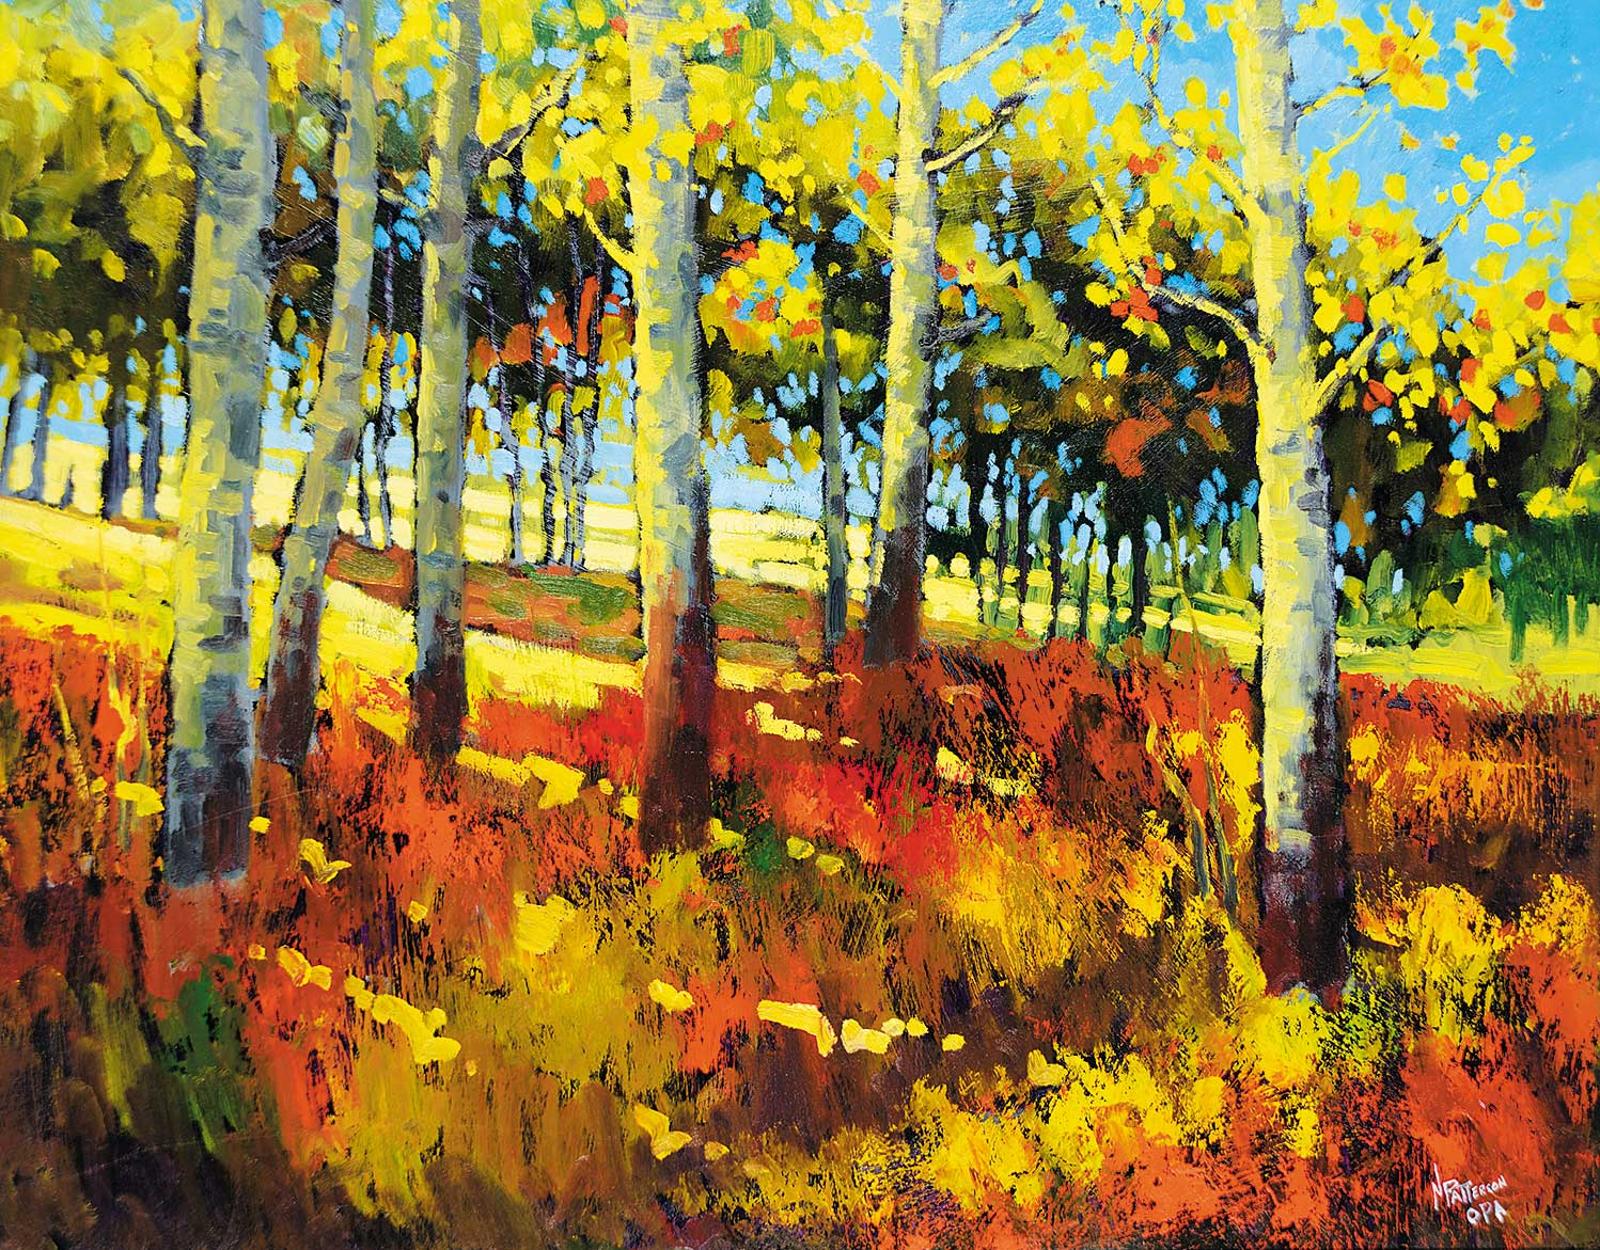 Neil Patterson (1947) - Fall Leaves